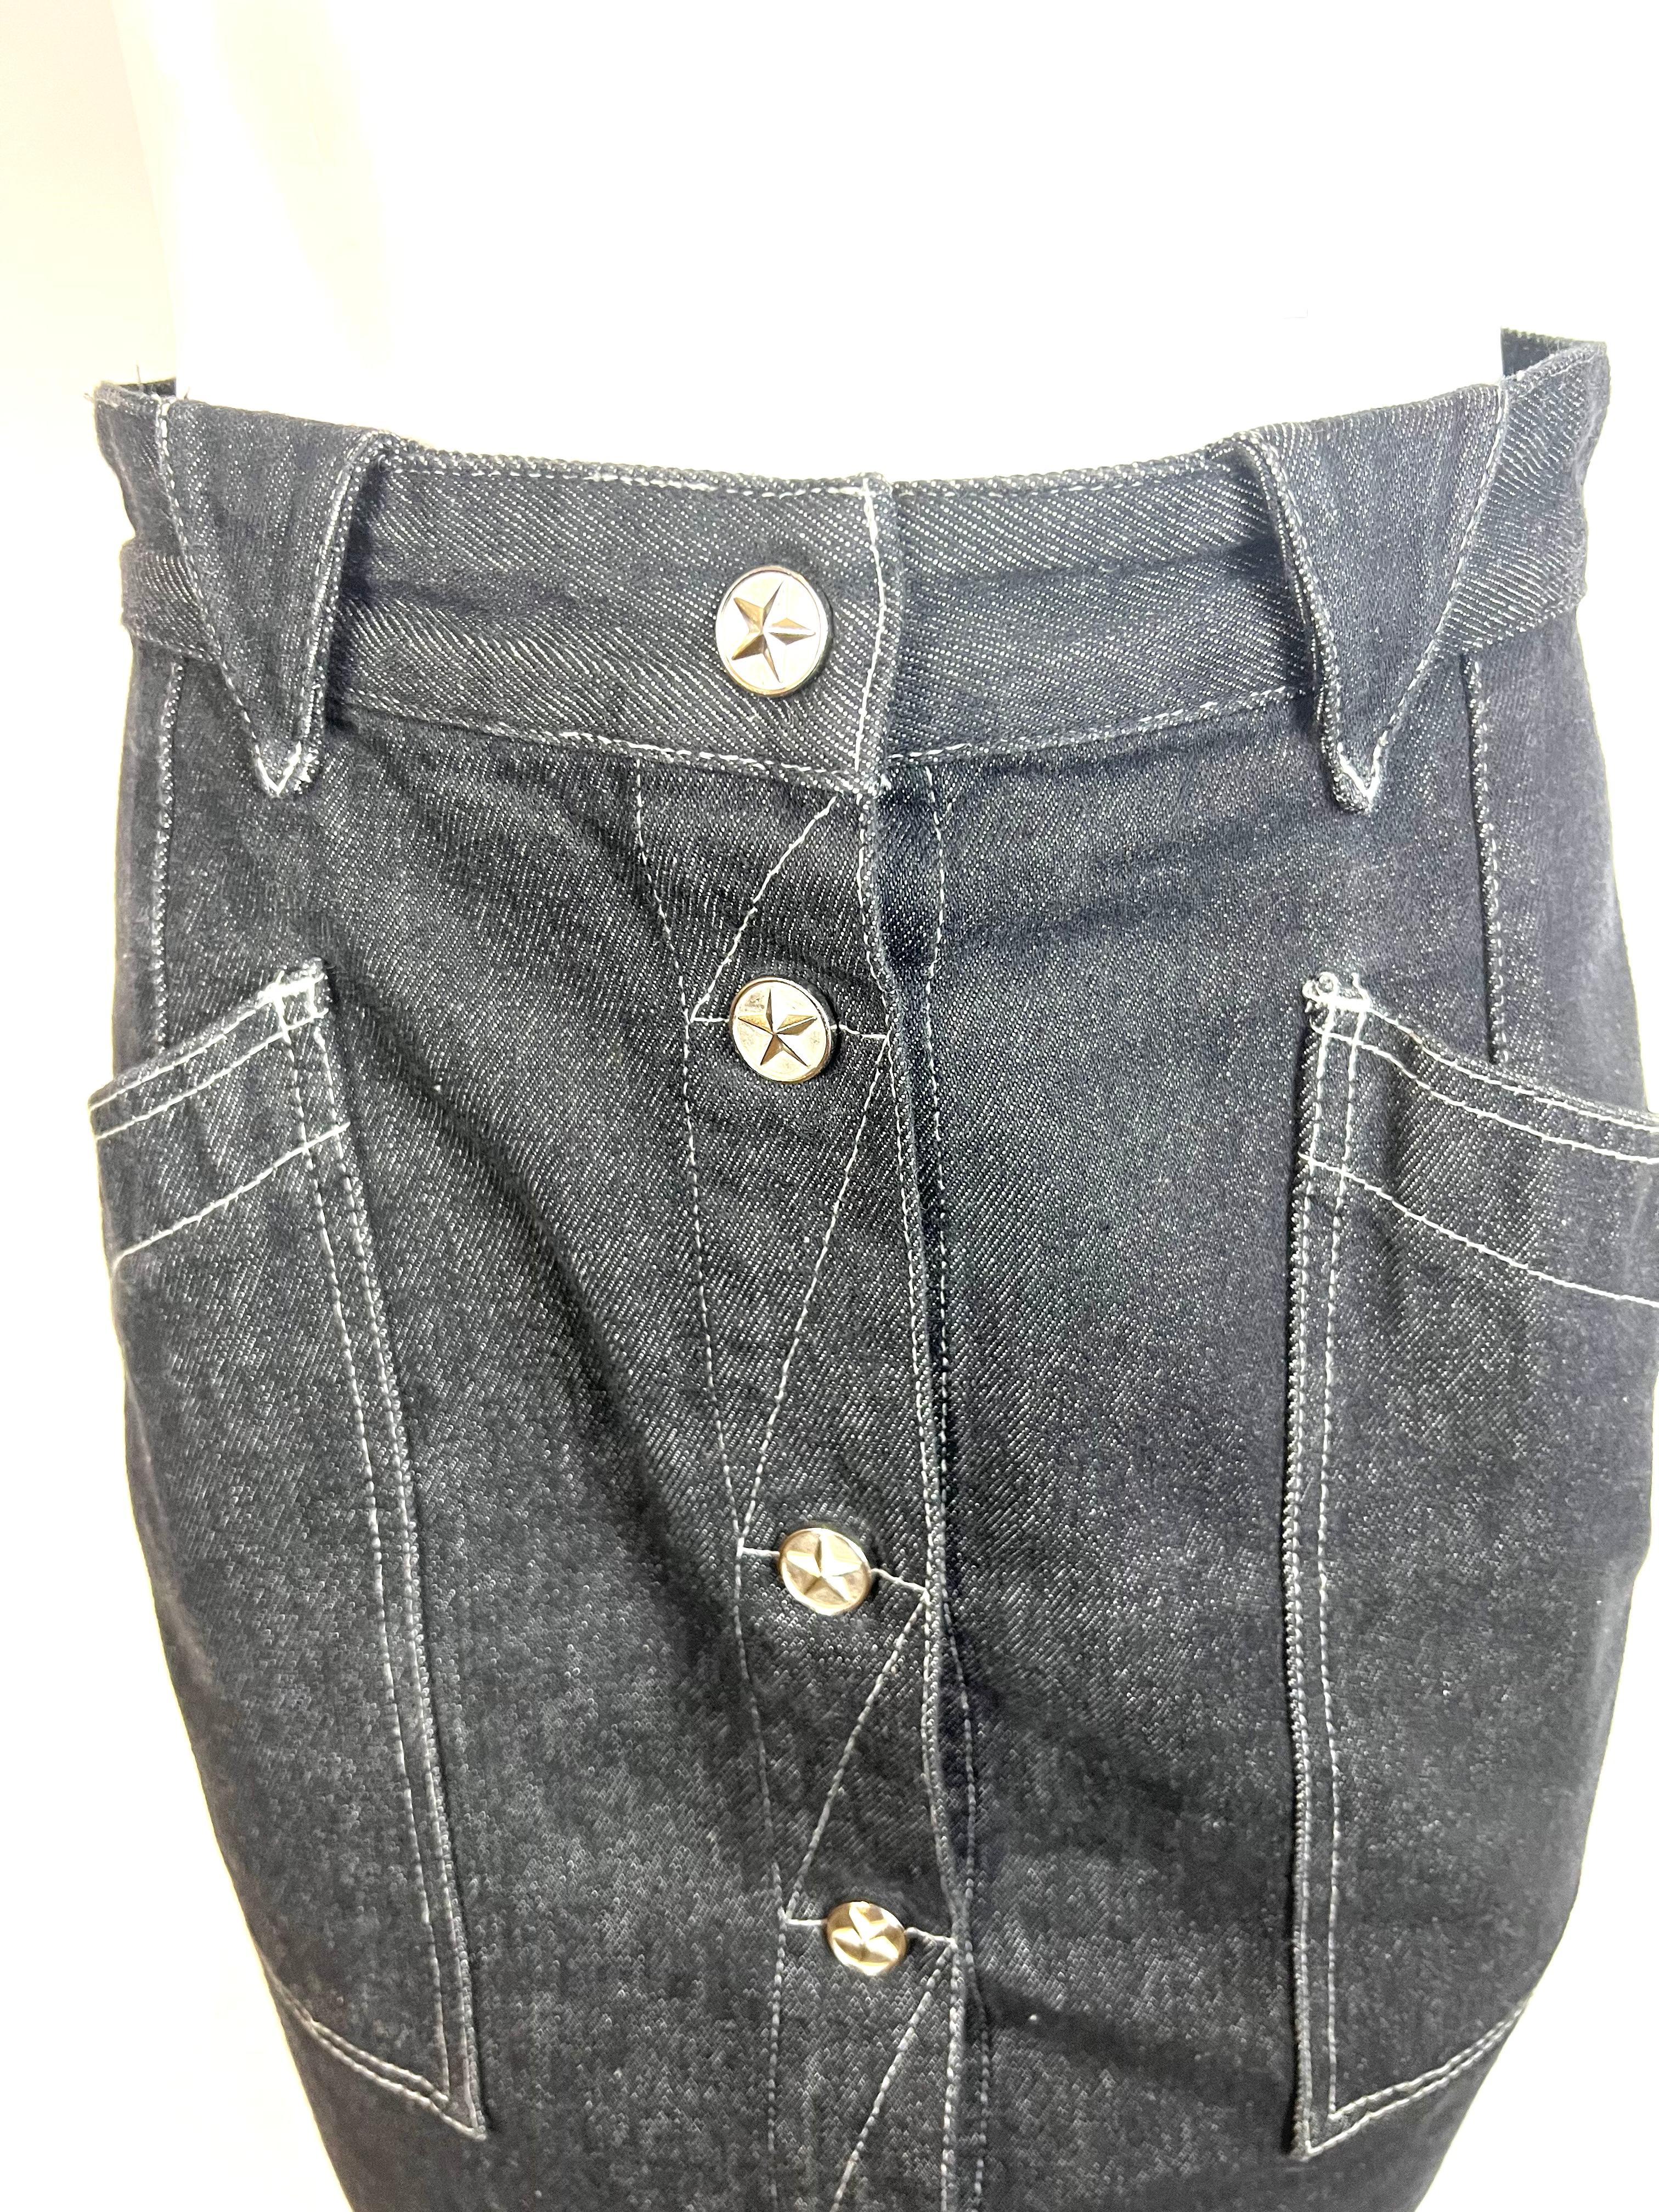 Thierry Mugler Jeans Denim Midi Skirt, Size 42

- High raise
- Front button closure
- Silver tone hardware
- Rear and side large pockets
- Knee length
- Made in Italy